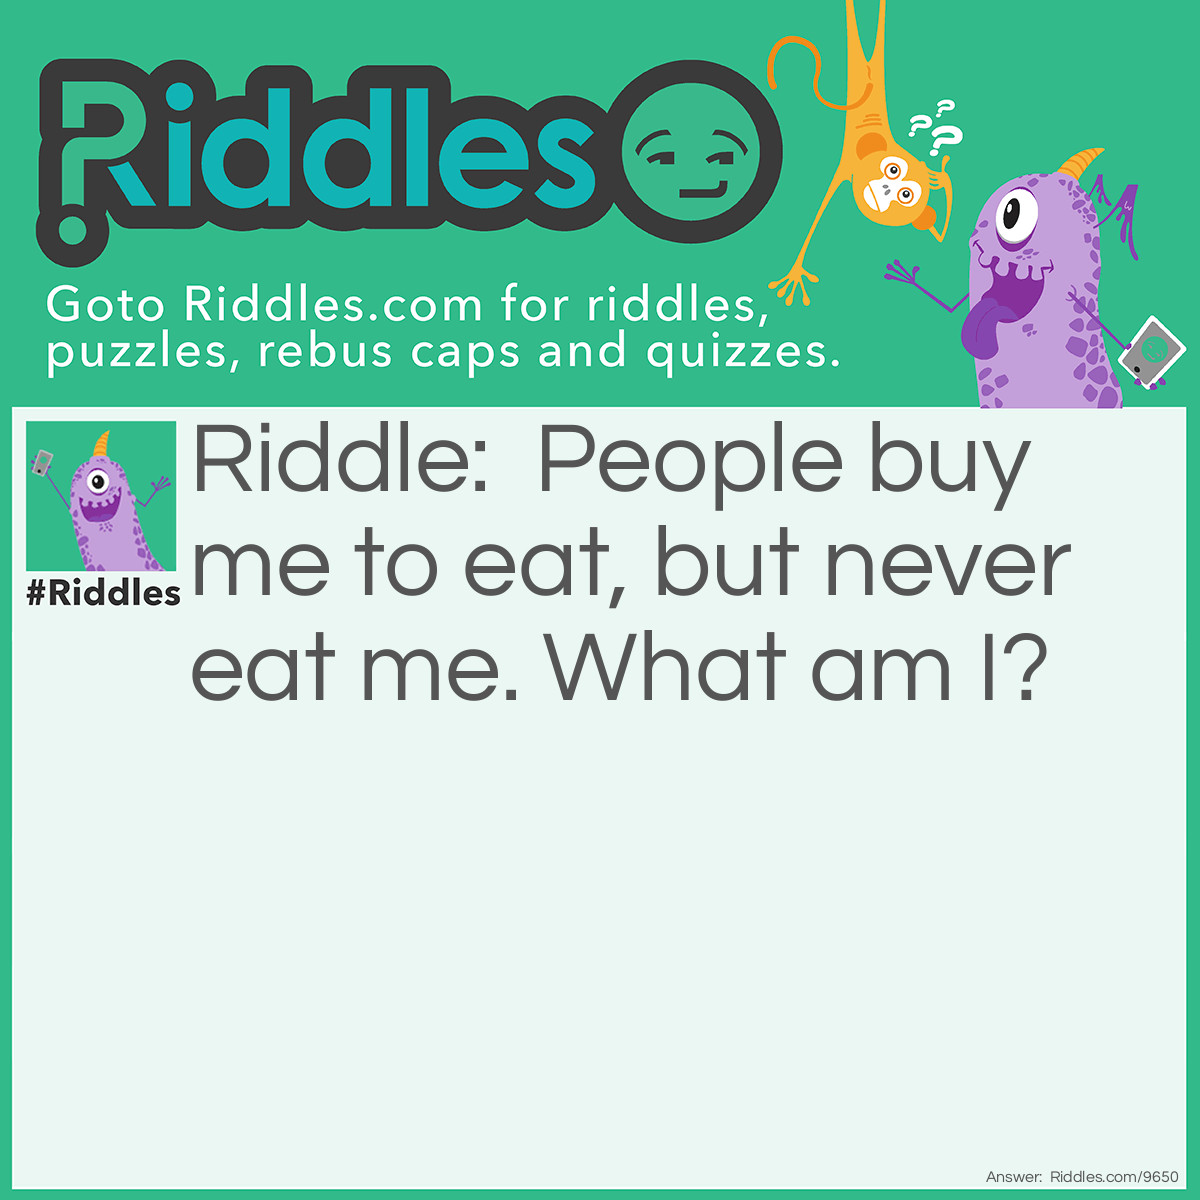 Riddle: People buy me to eat, but never eat me. What am I? Answer: Plates and Cutlery.